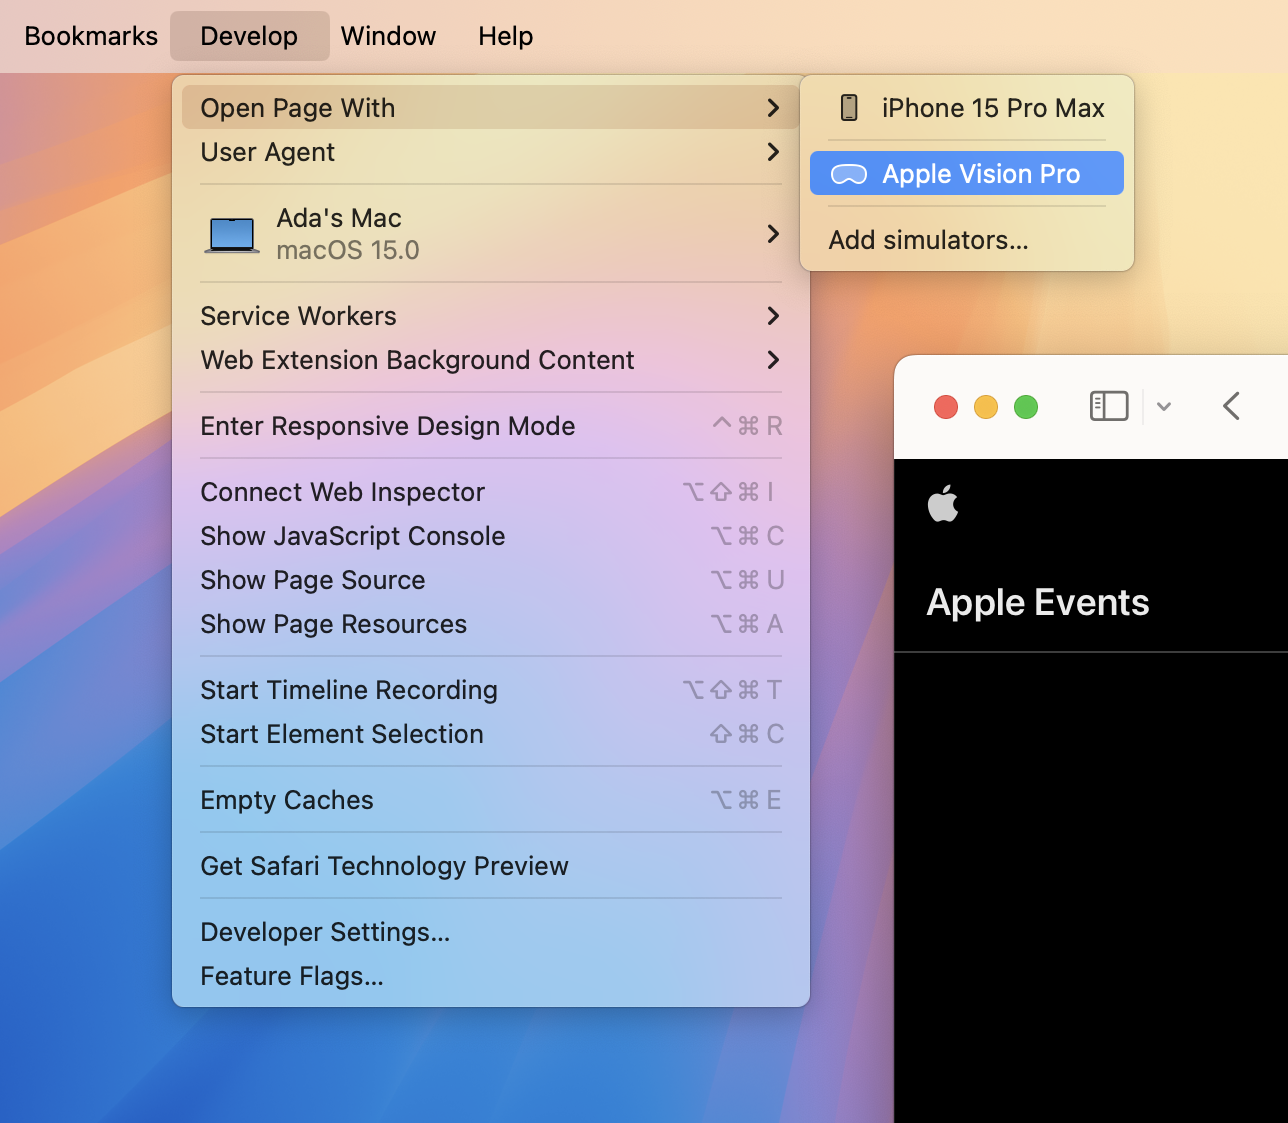 Develop menu showing the Open Page With menu selected with Apple Vision Pro sub-menu option selected.